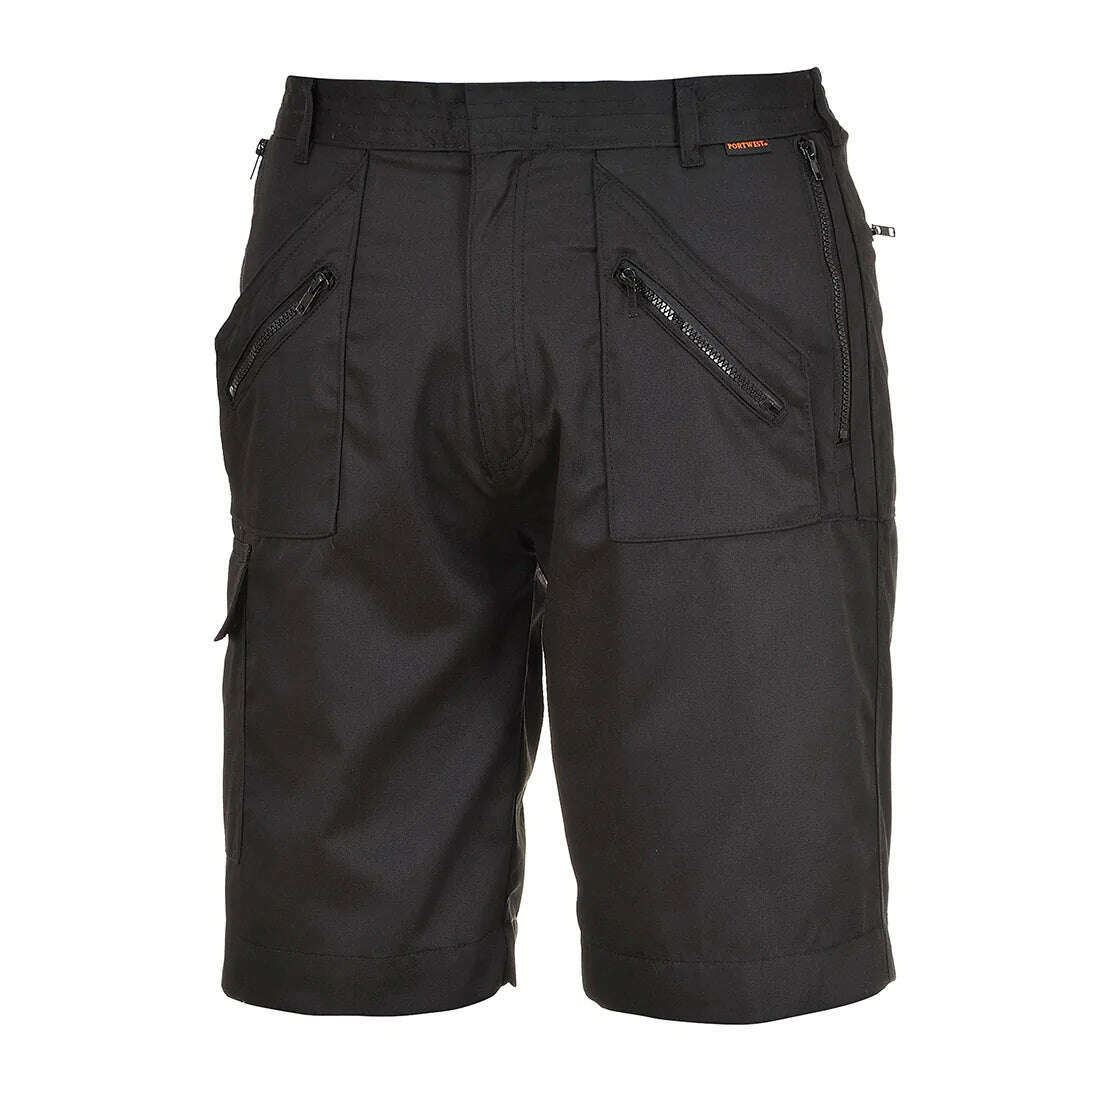 S889 - Action Shorts